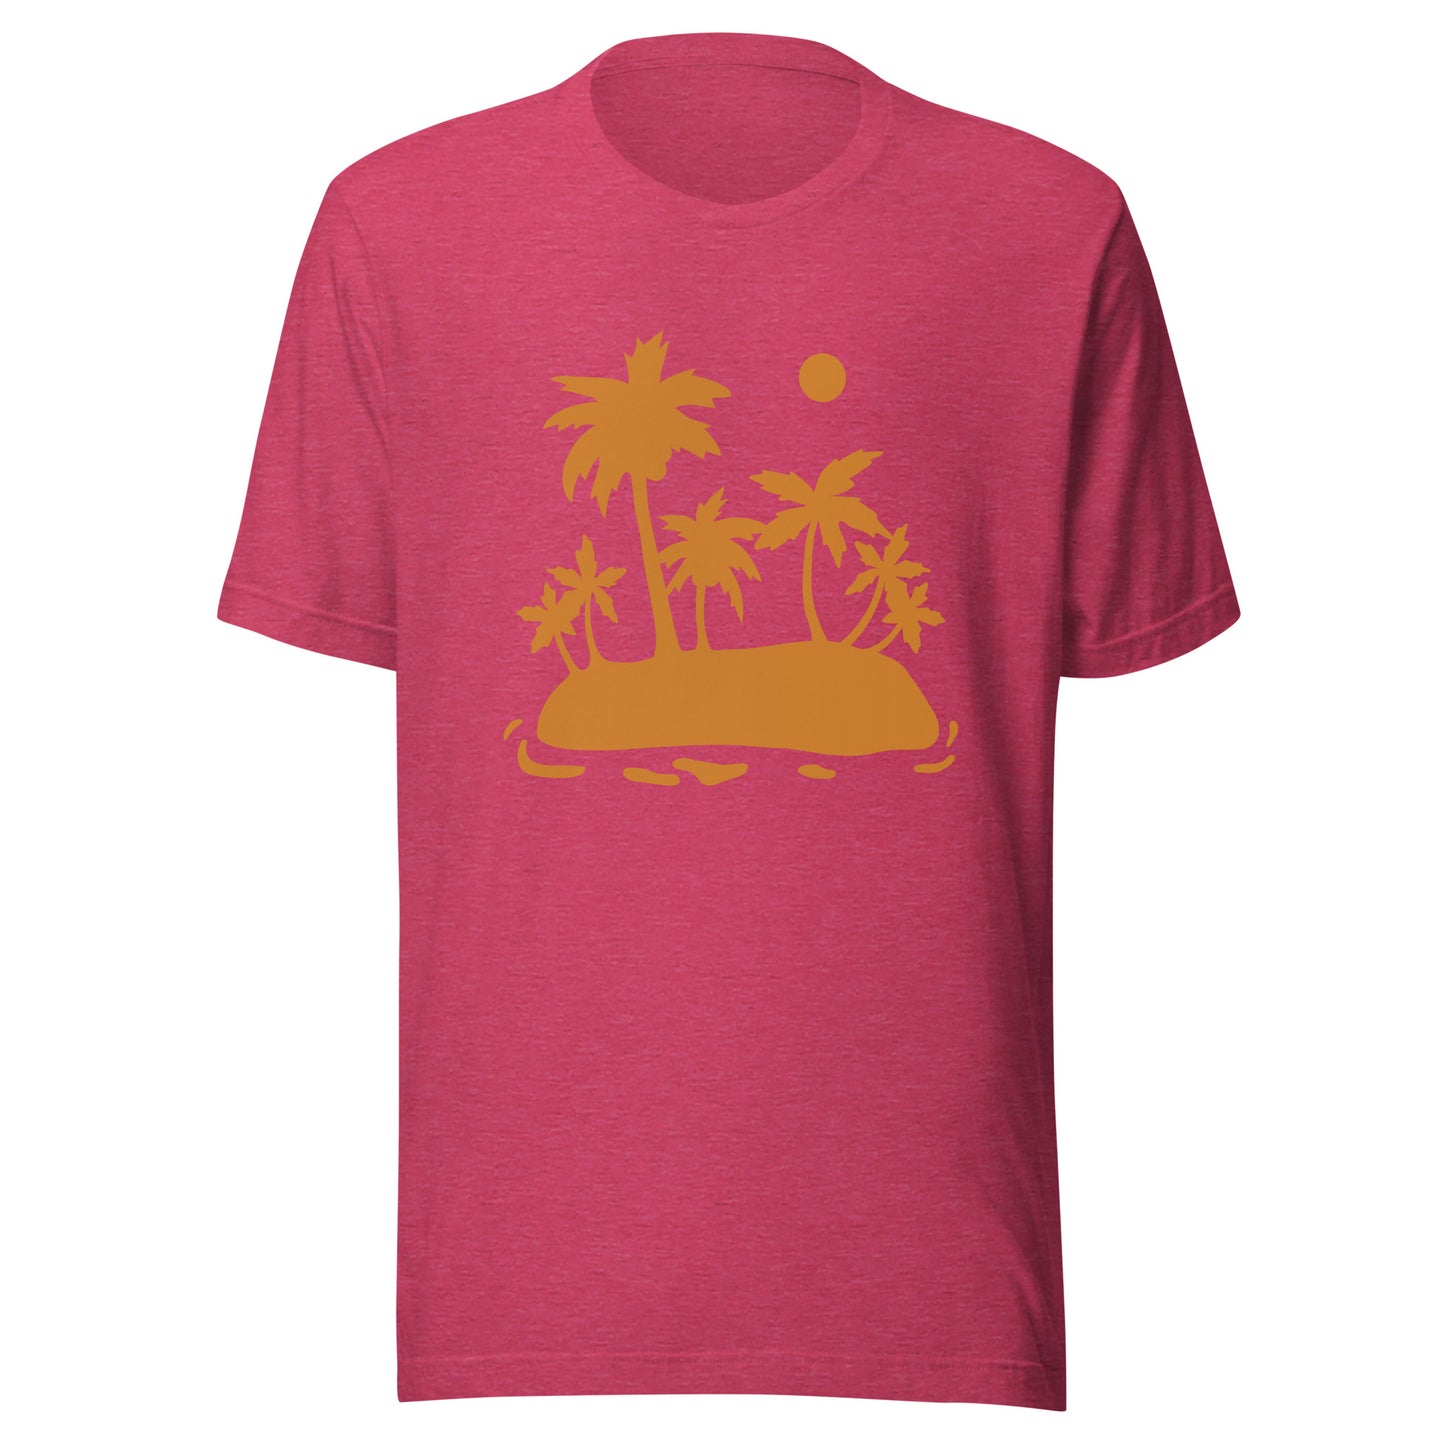 Palm Trees and Sun Unisex t-shirt, Shirt with Palm Trees and Sun, Vacation Summer Shirt for an Island